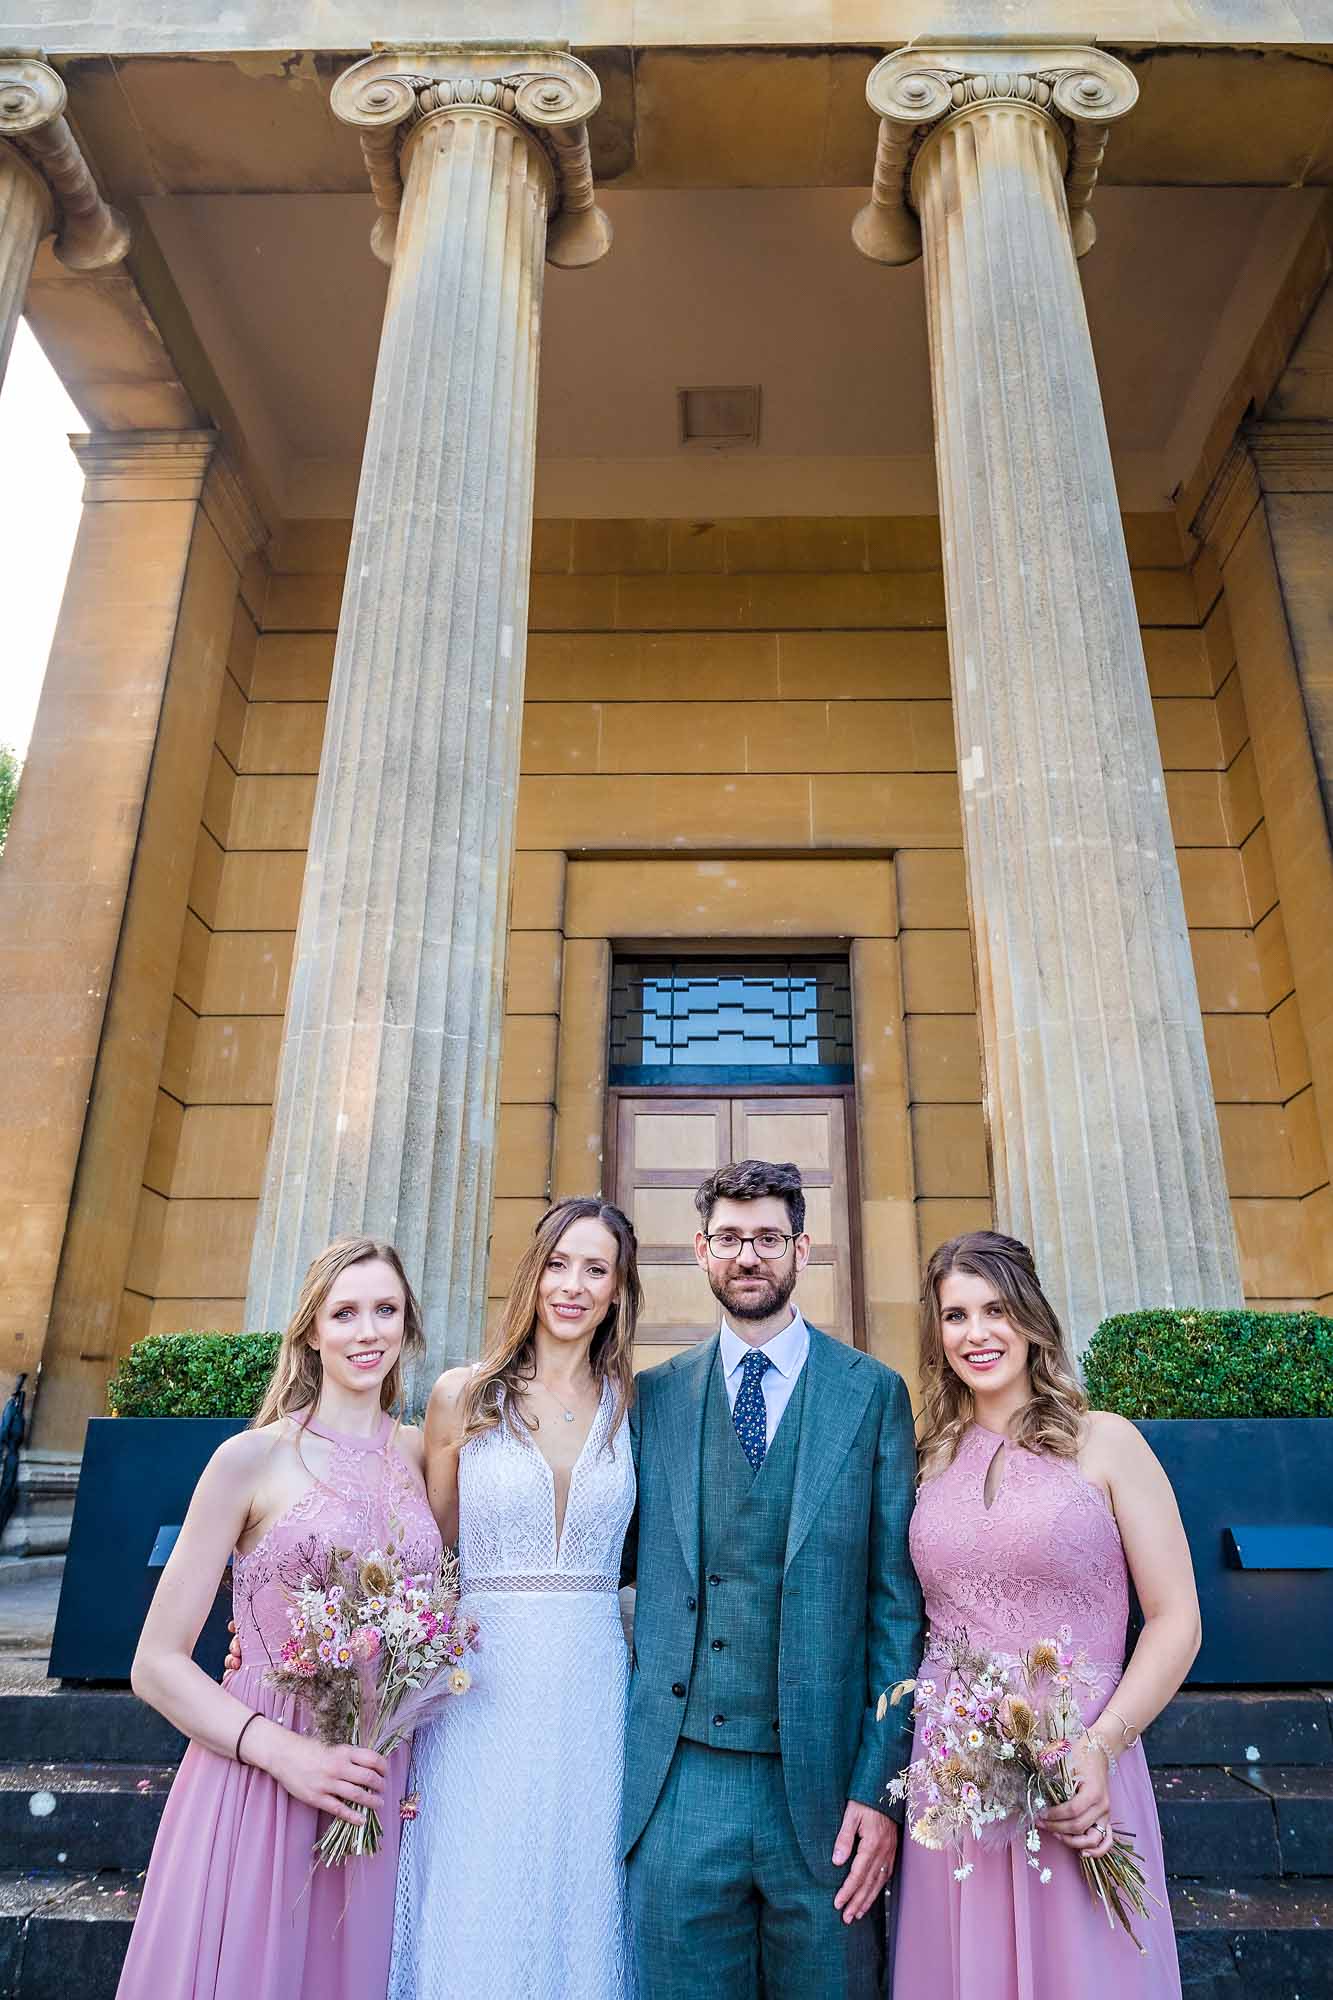 The couple pose with two lilac dressed bridemaids at Arnos Vale